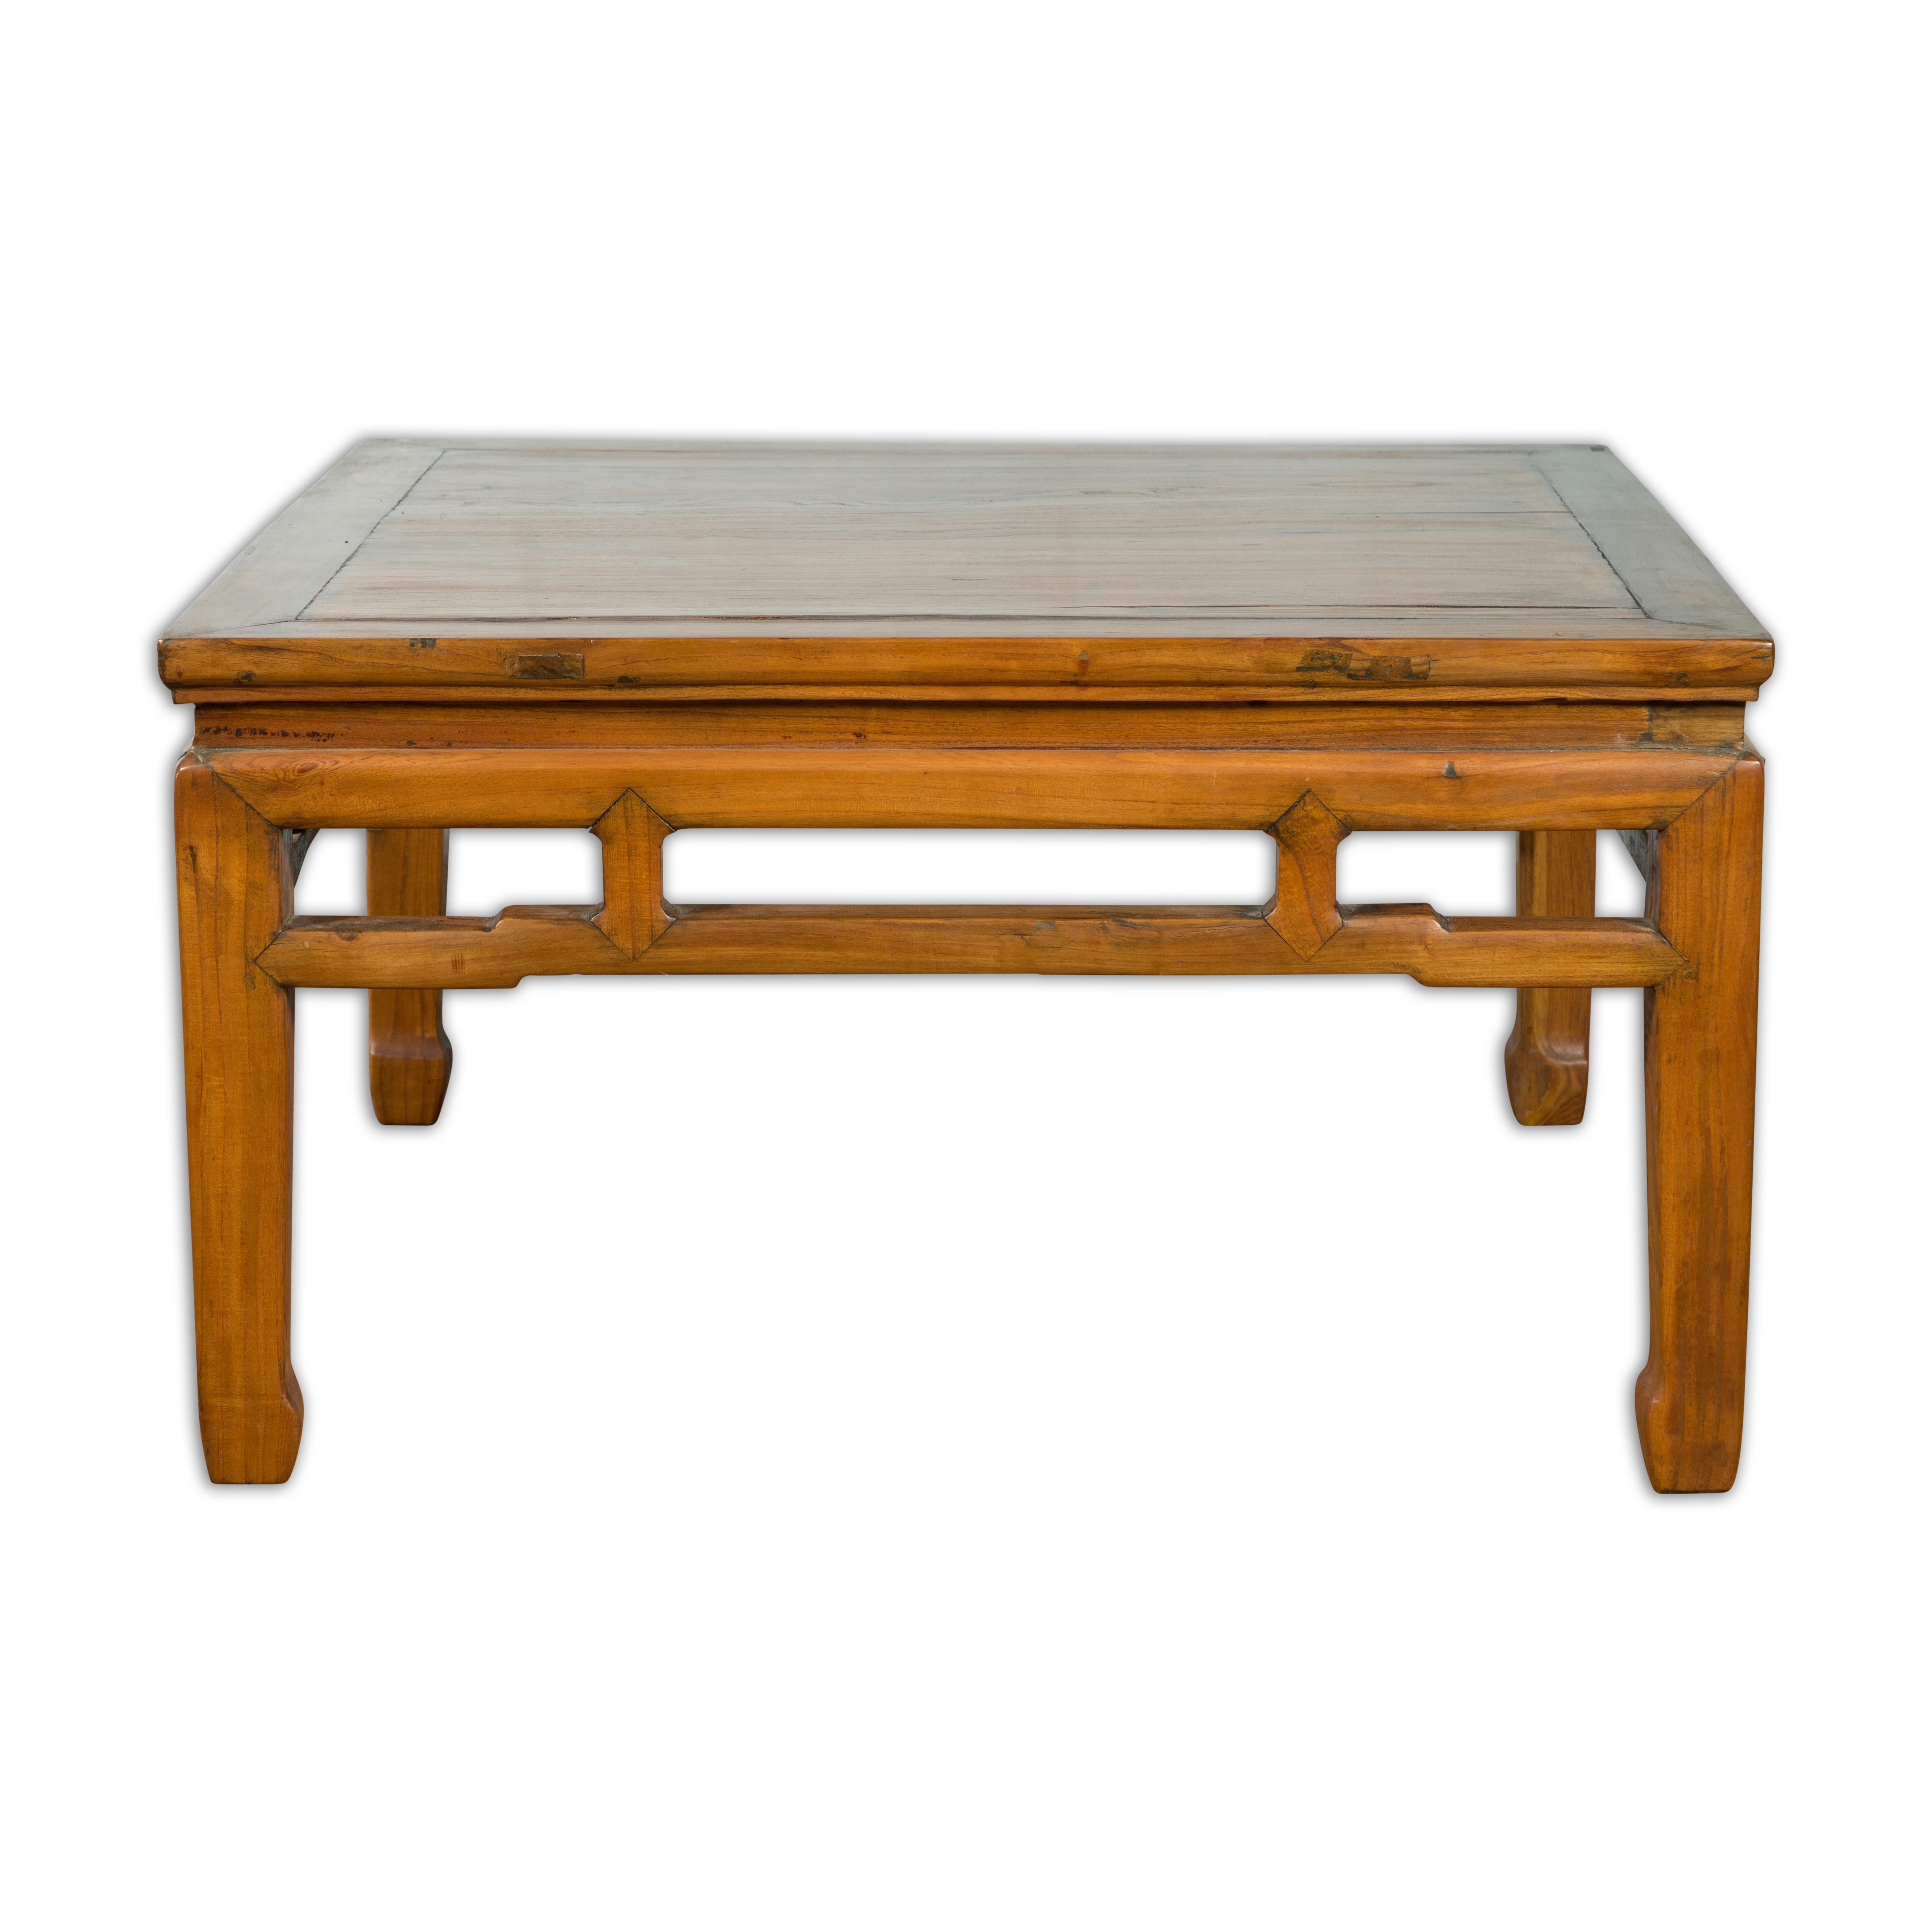 Chinese Qing Dynasty Low Table with Humpback Stretcher and Horse Hoof Feet 8